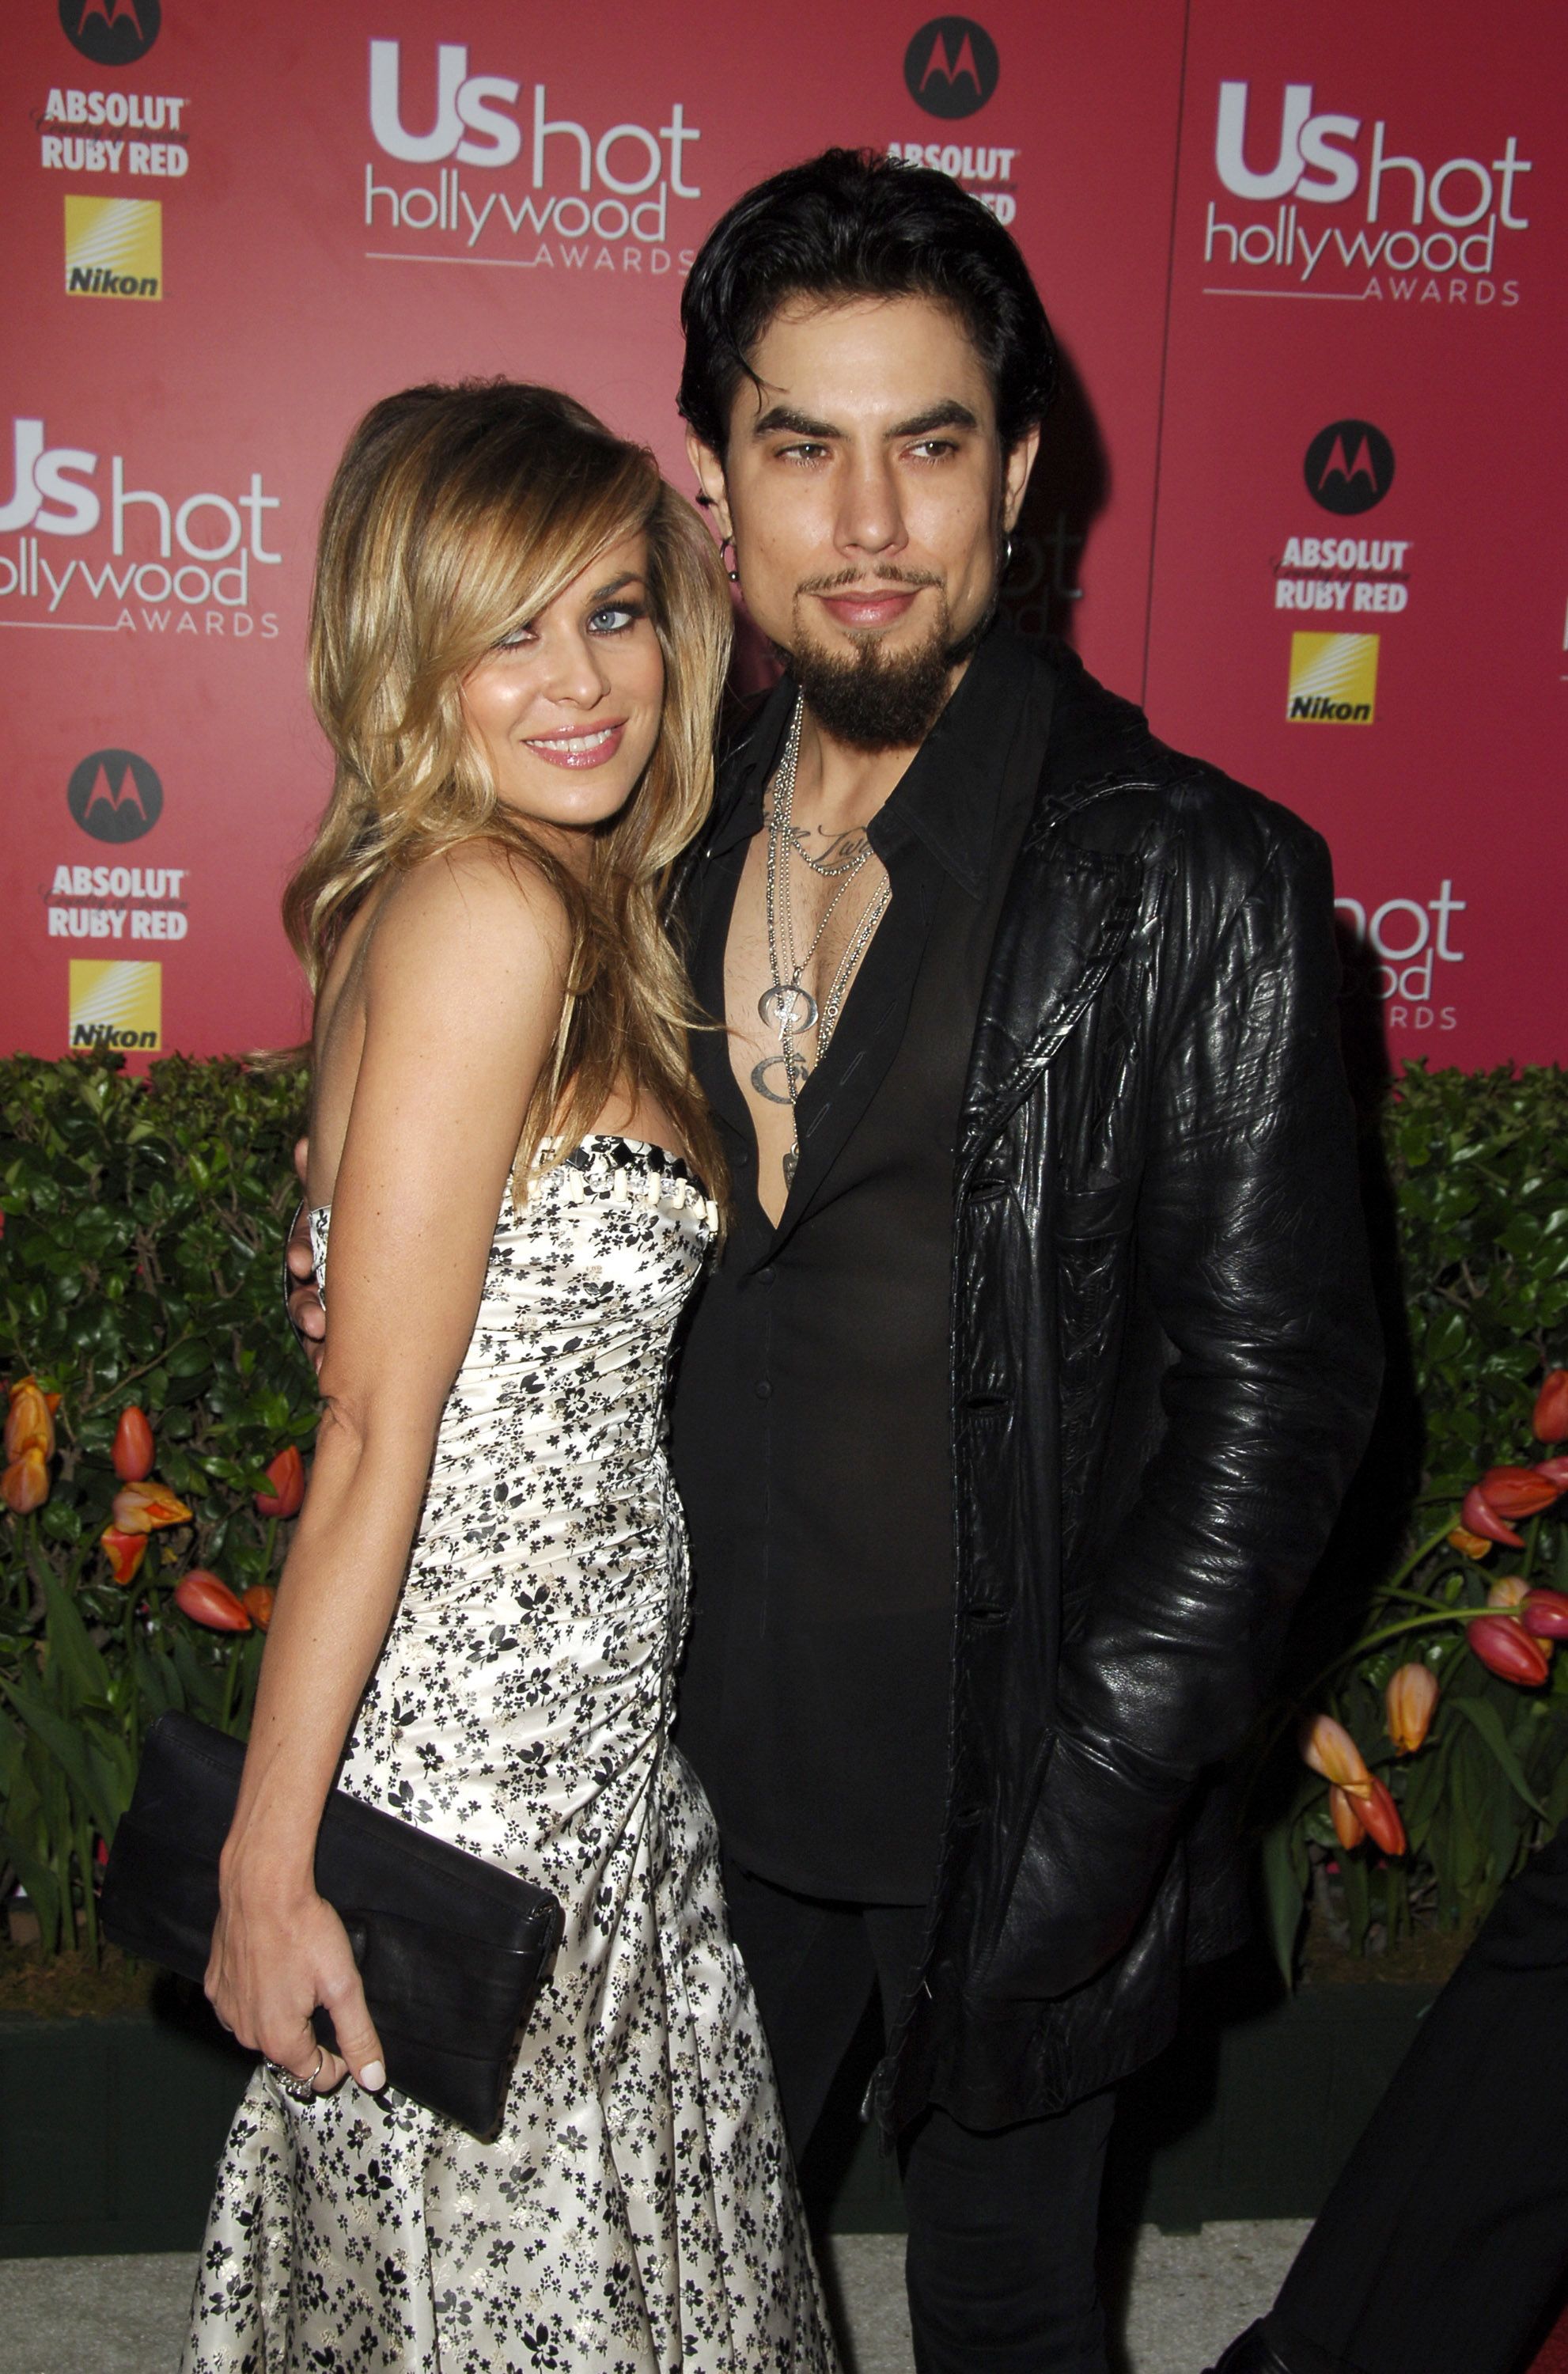 Carmen Electra and Dave Navarro at the 2006 US Weekly Hot Hollywood Awards in Los Angeles, California. | Source: Getty Images